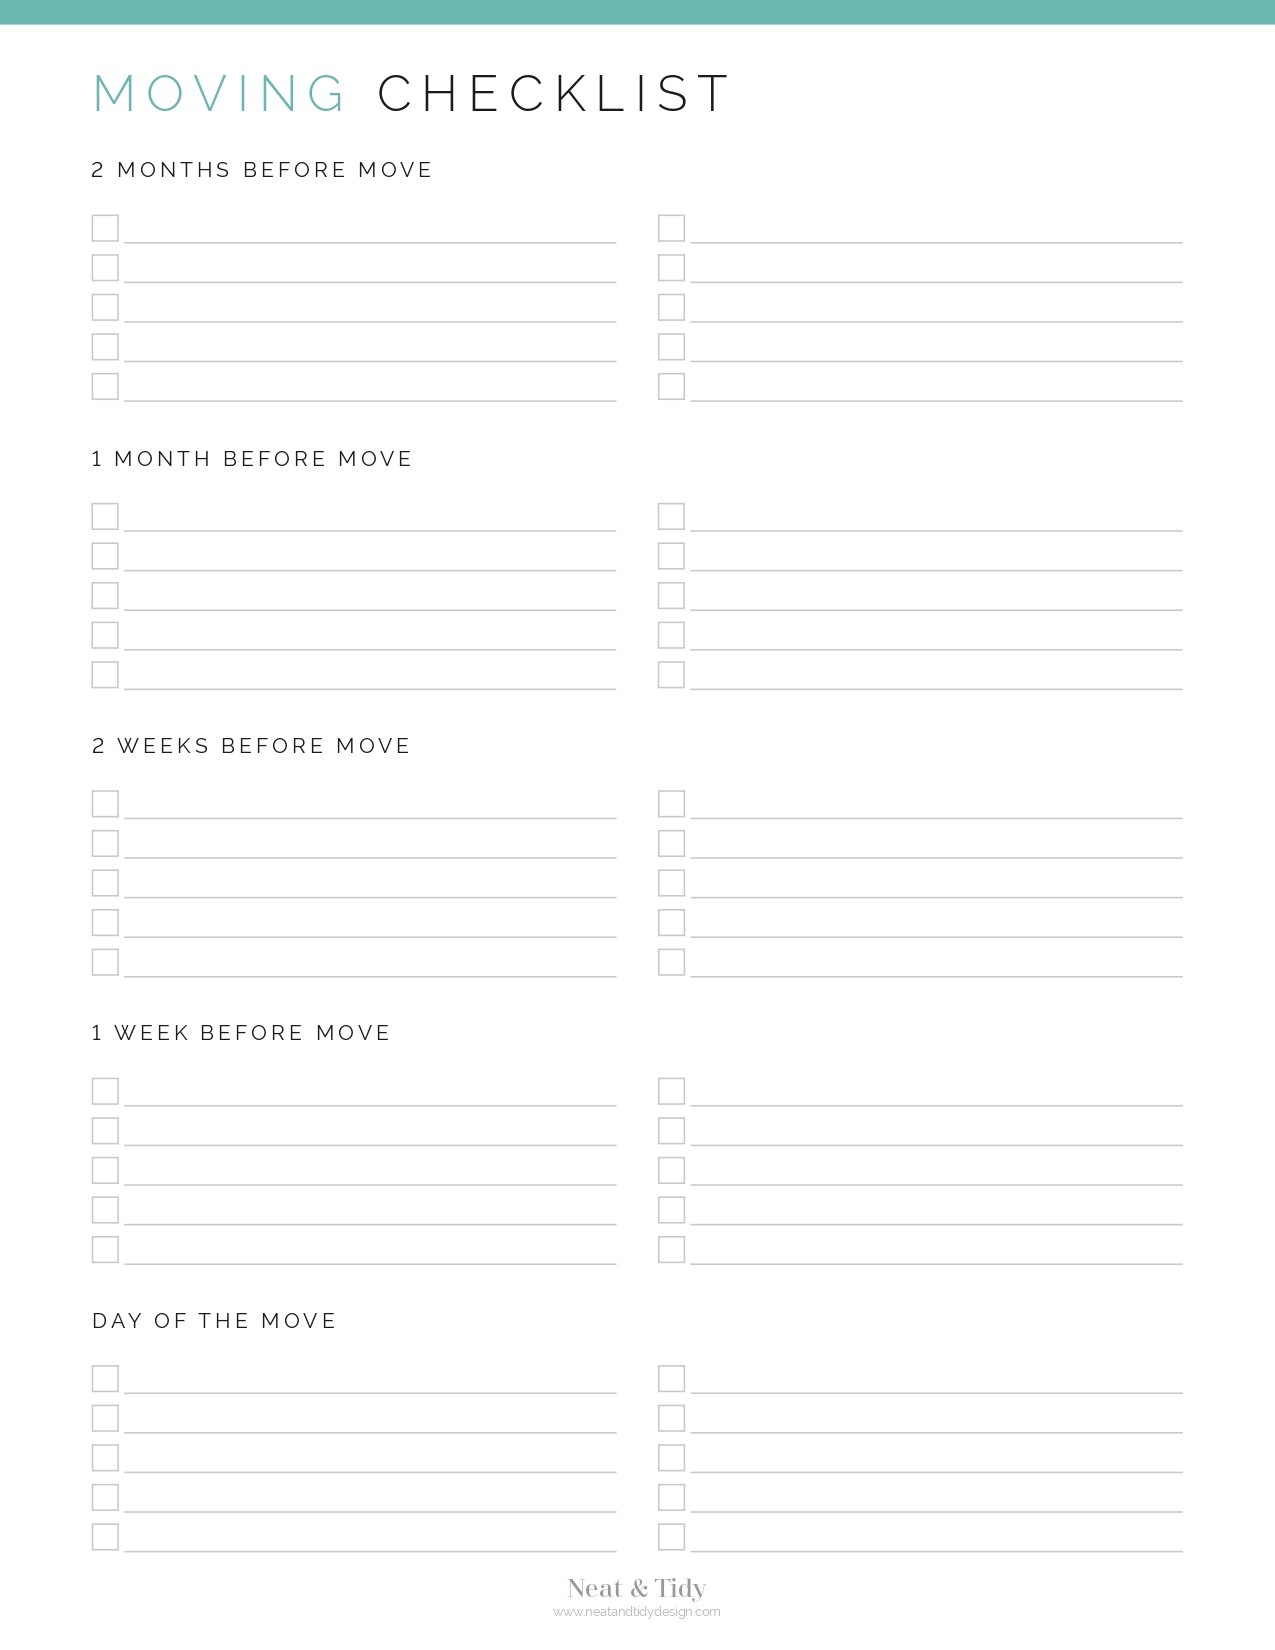 Moving Checklist / Moving Guide - Free & Printable